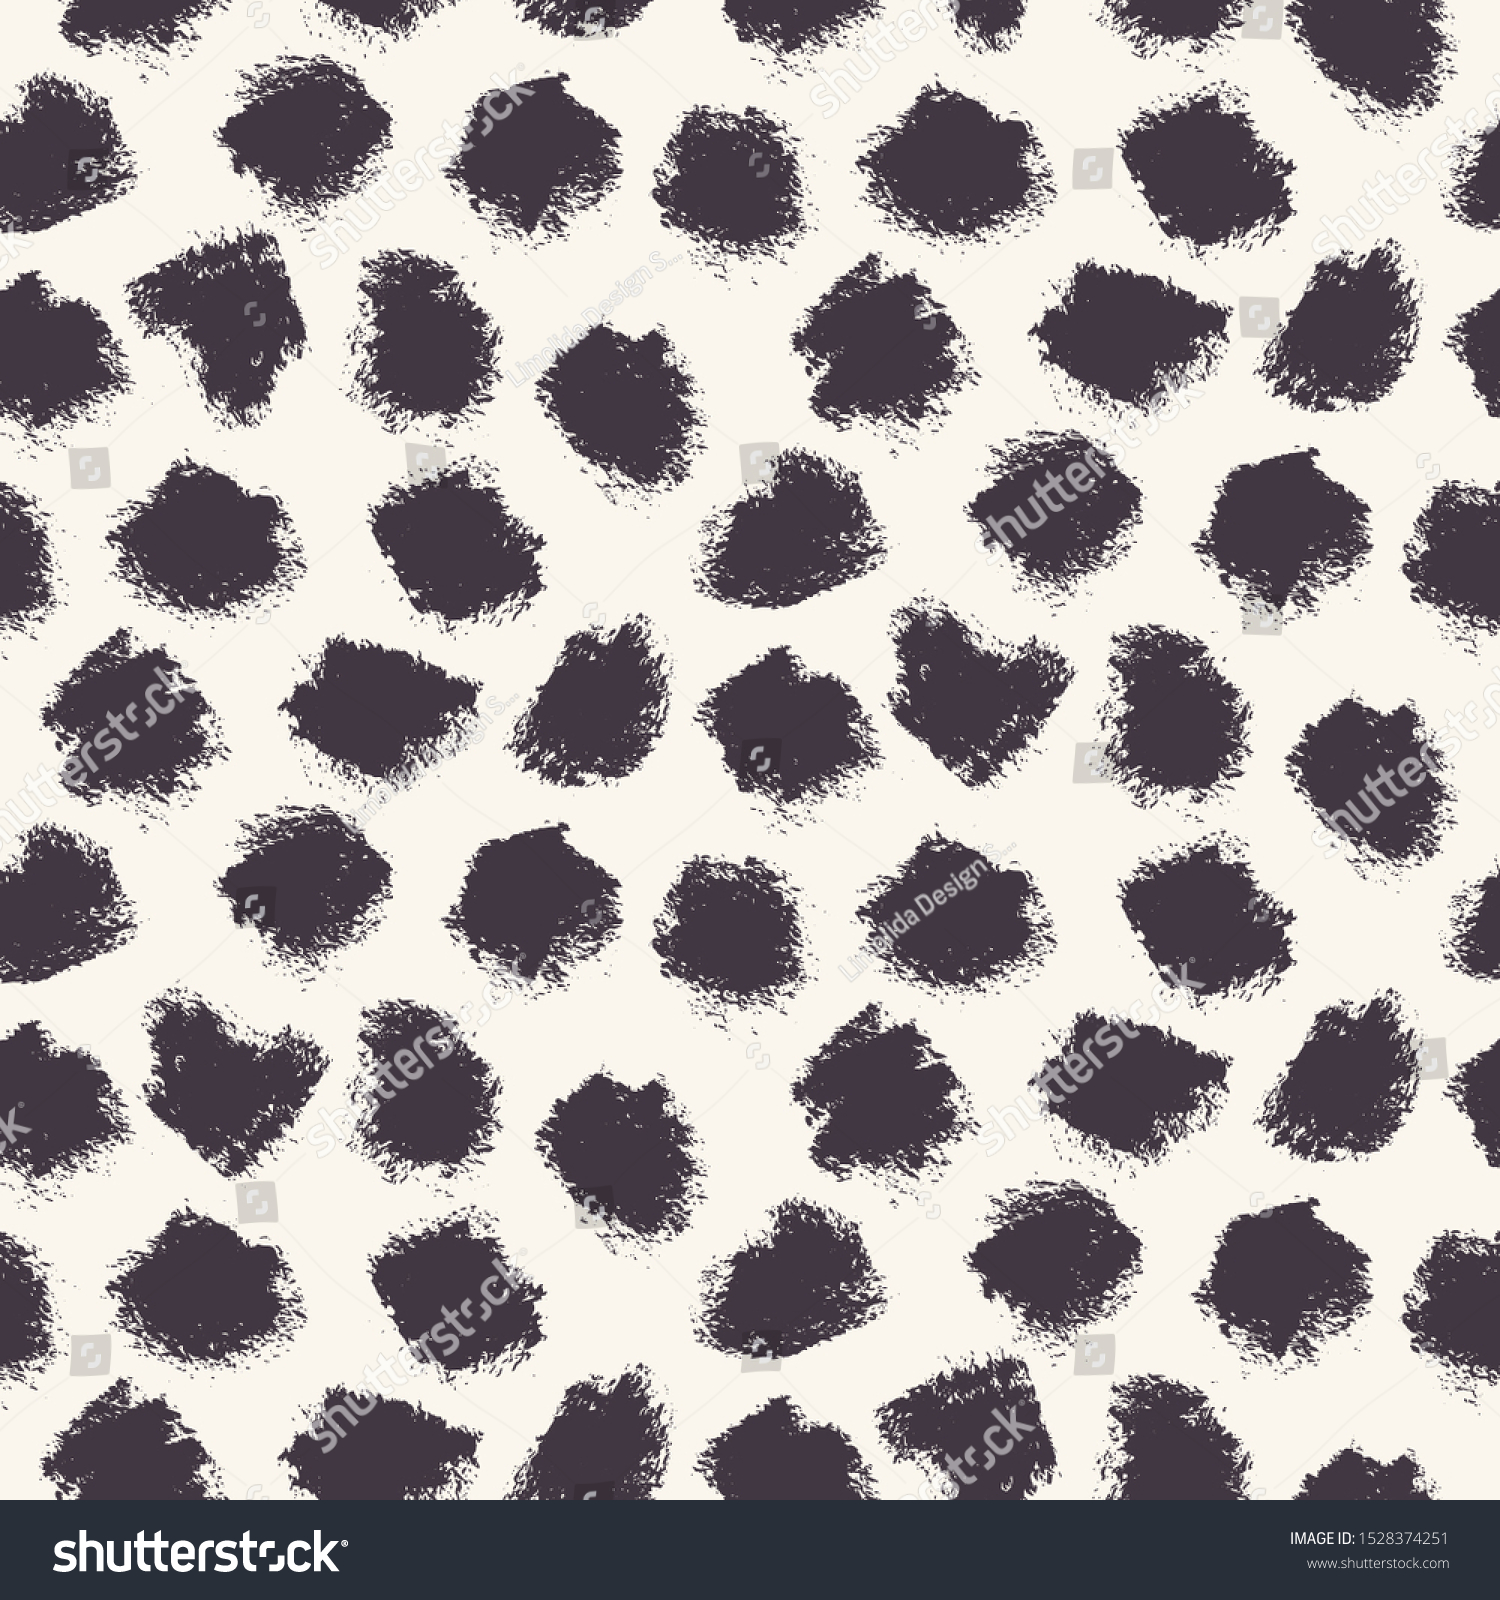 SVG of Appaloosa Imperfect Polka Dot Spots Seamless Pattern. Doodle Brushstroke Dotted Animal Skin Background in Monochrome. Abstract Dalmation All Over Print for Fashion, Branding, Packaging. Vector eps10 svg